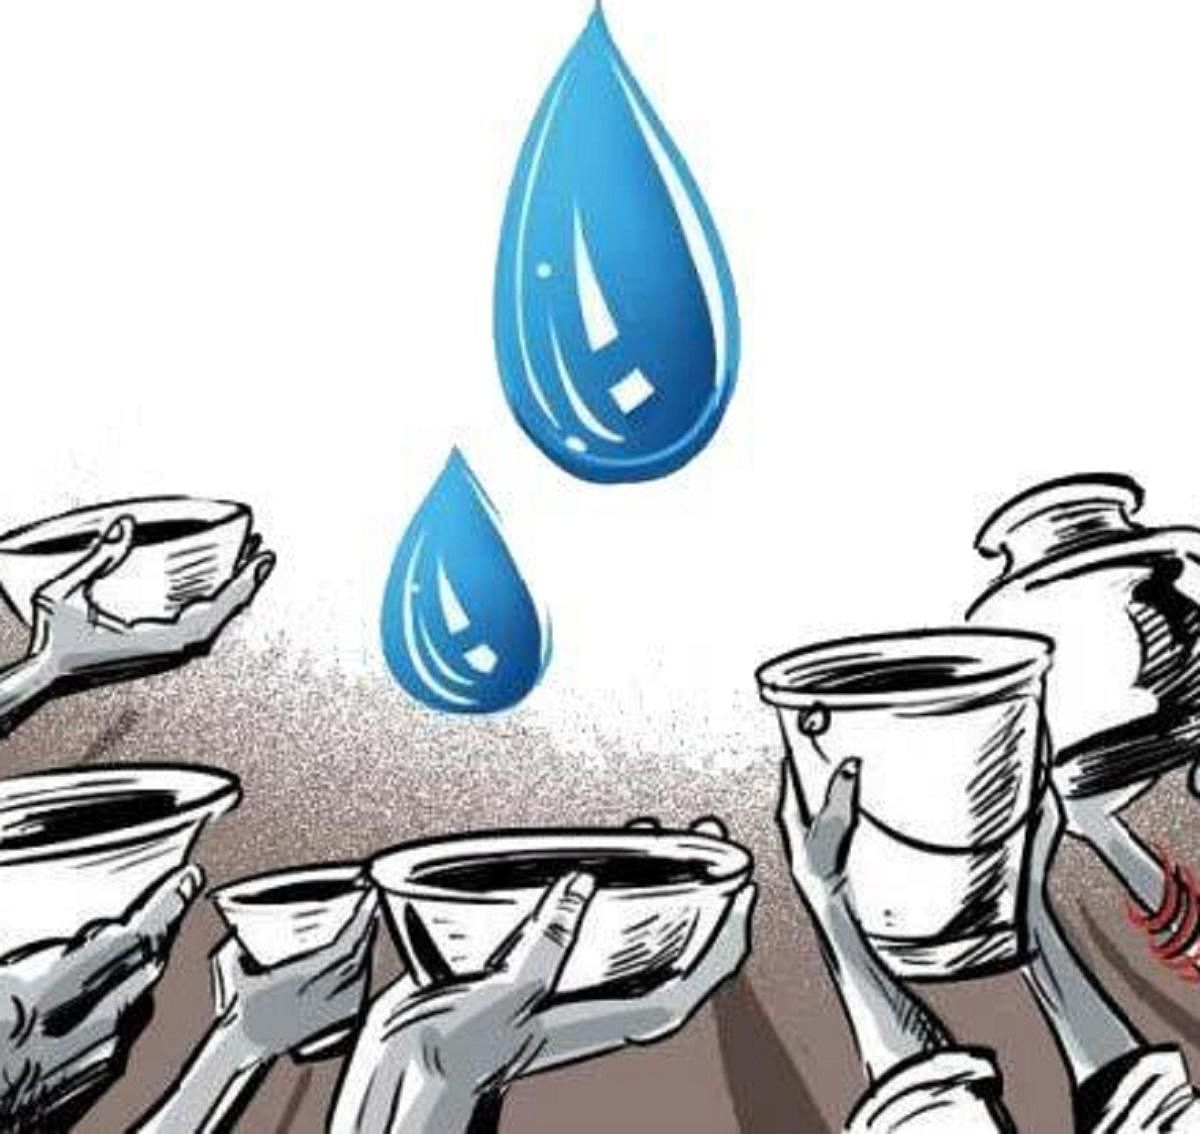 Budget to deal with water crisis